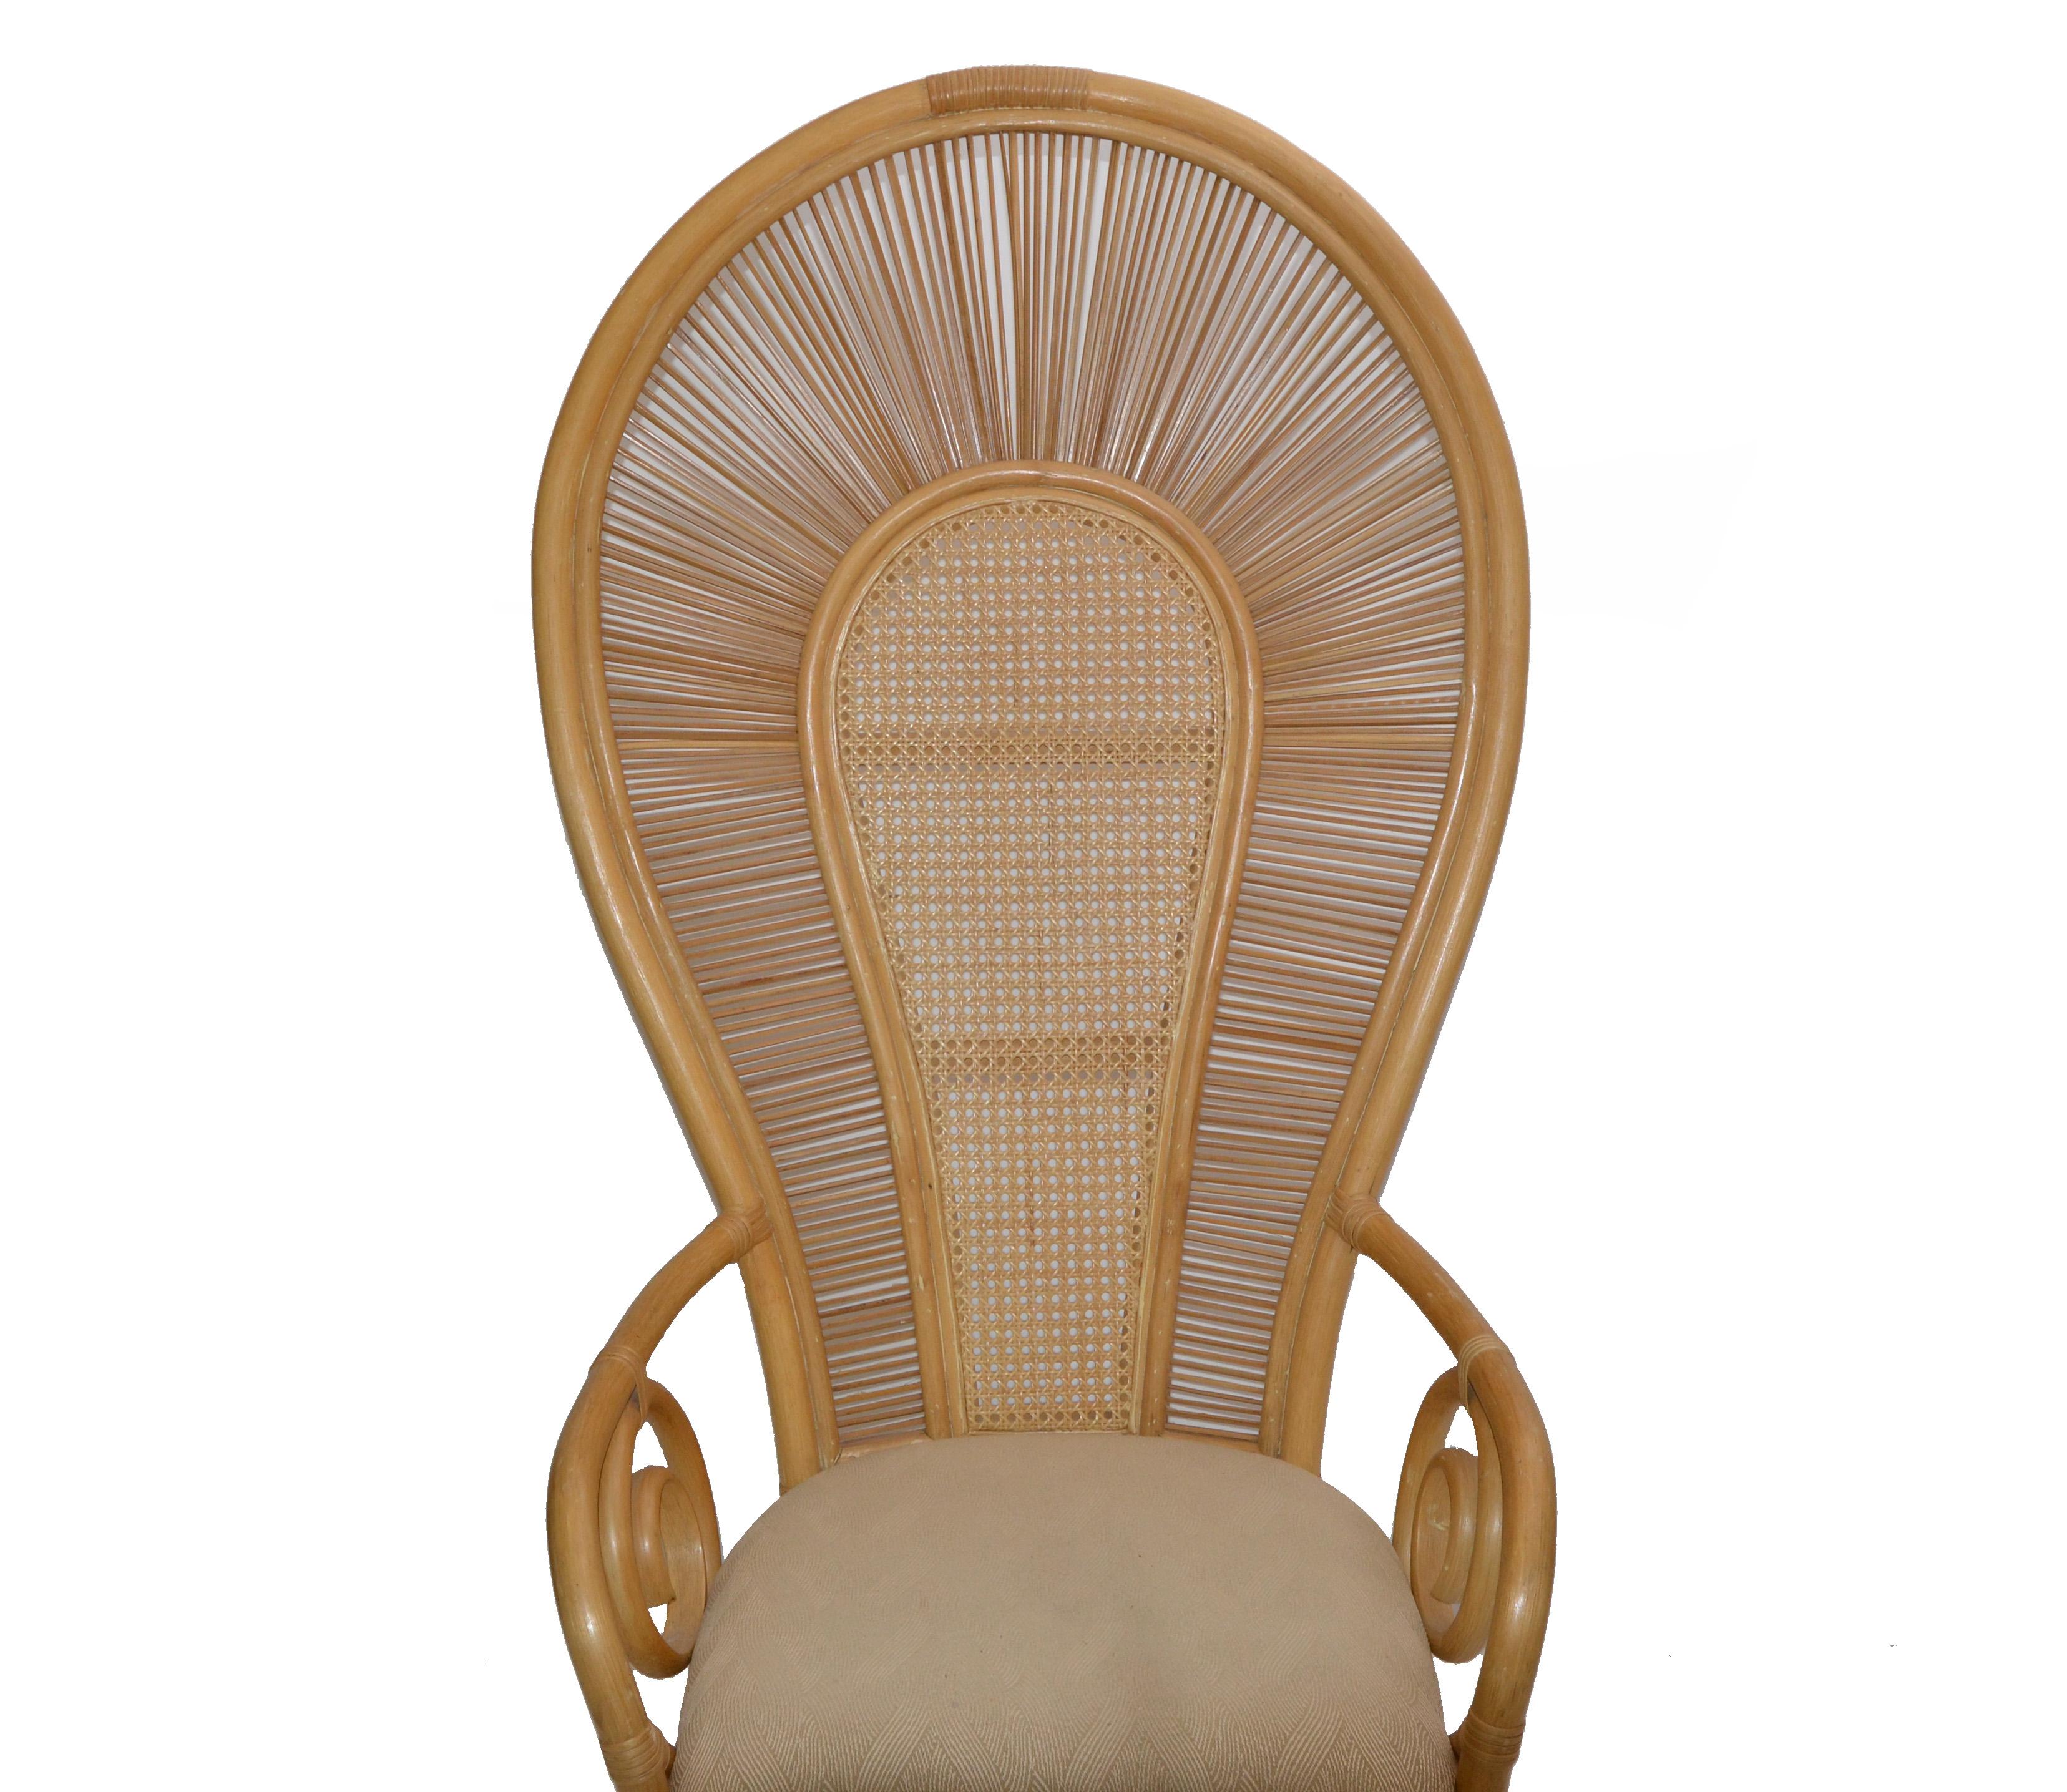 Late 20th Century Bohemian Chic Cane, Rattan, Bamboo & Fabric Seat Peacock High Back Chair 1980s